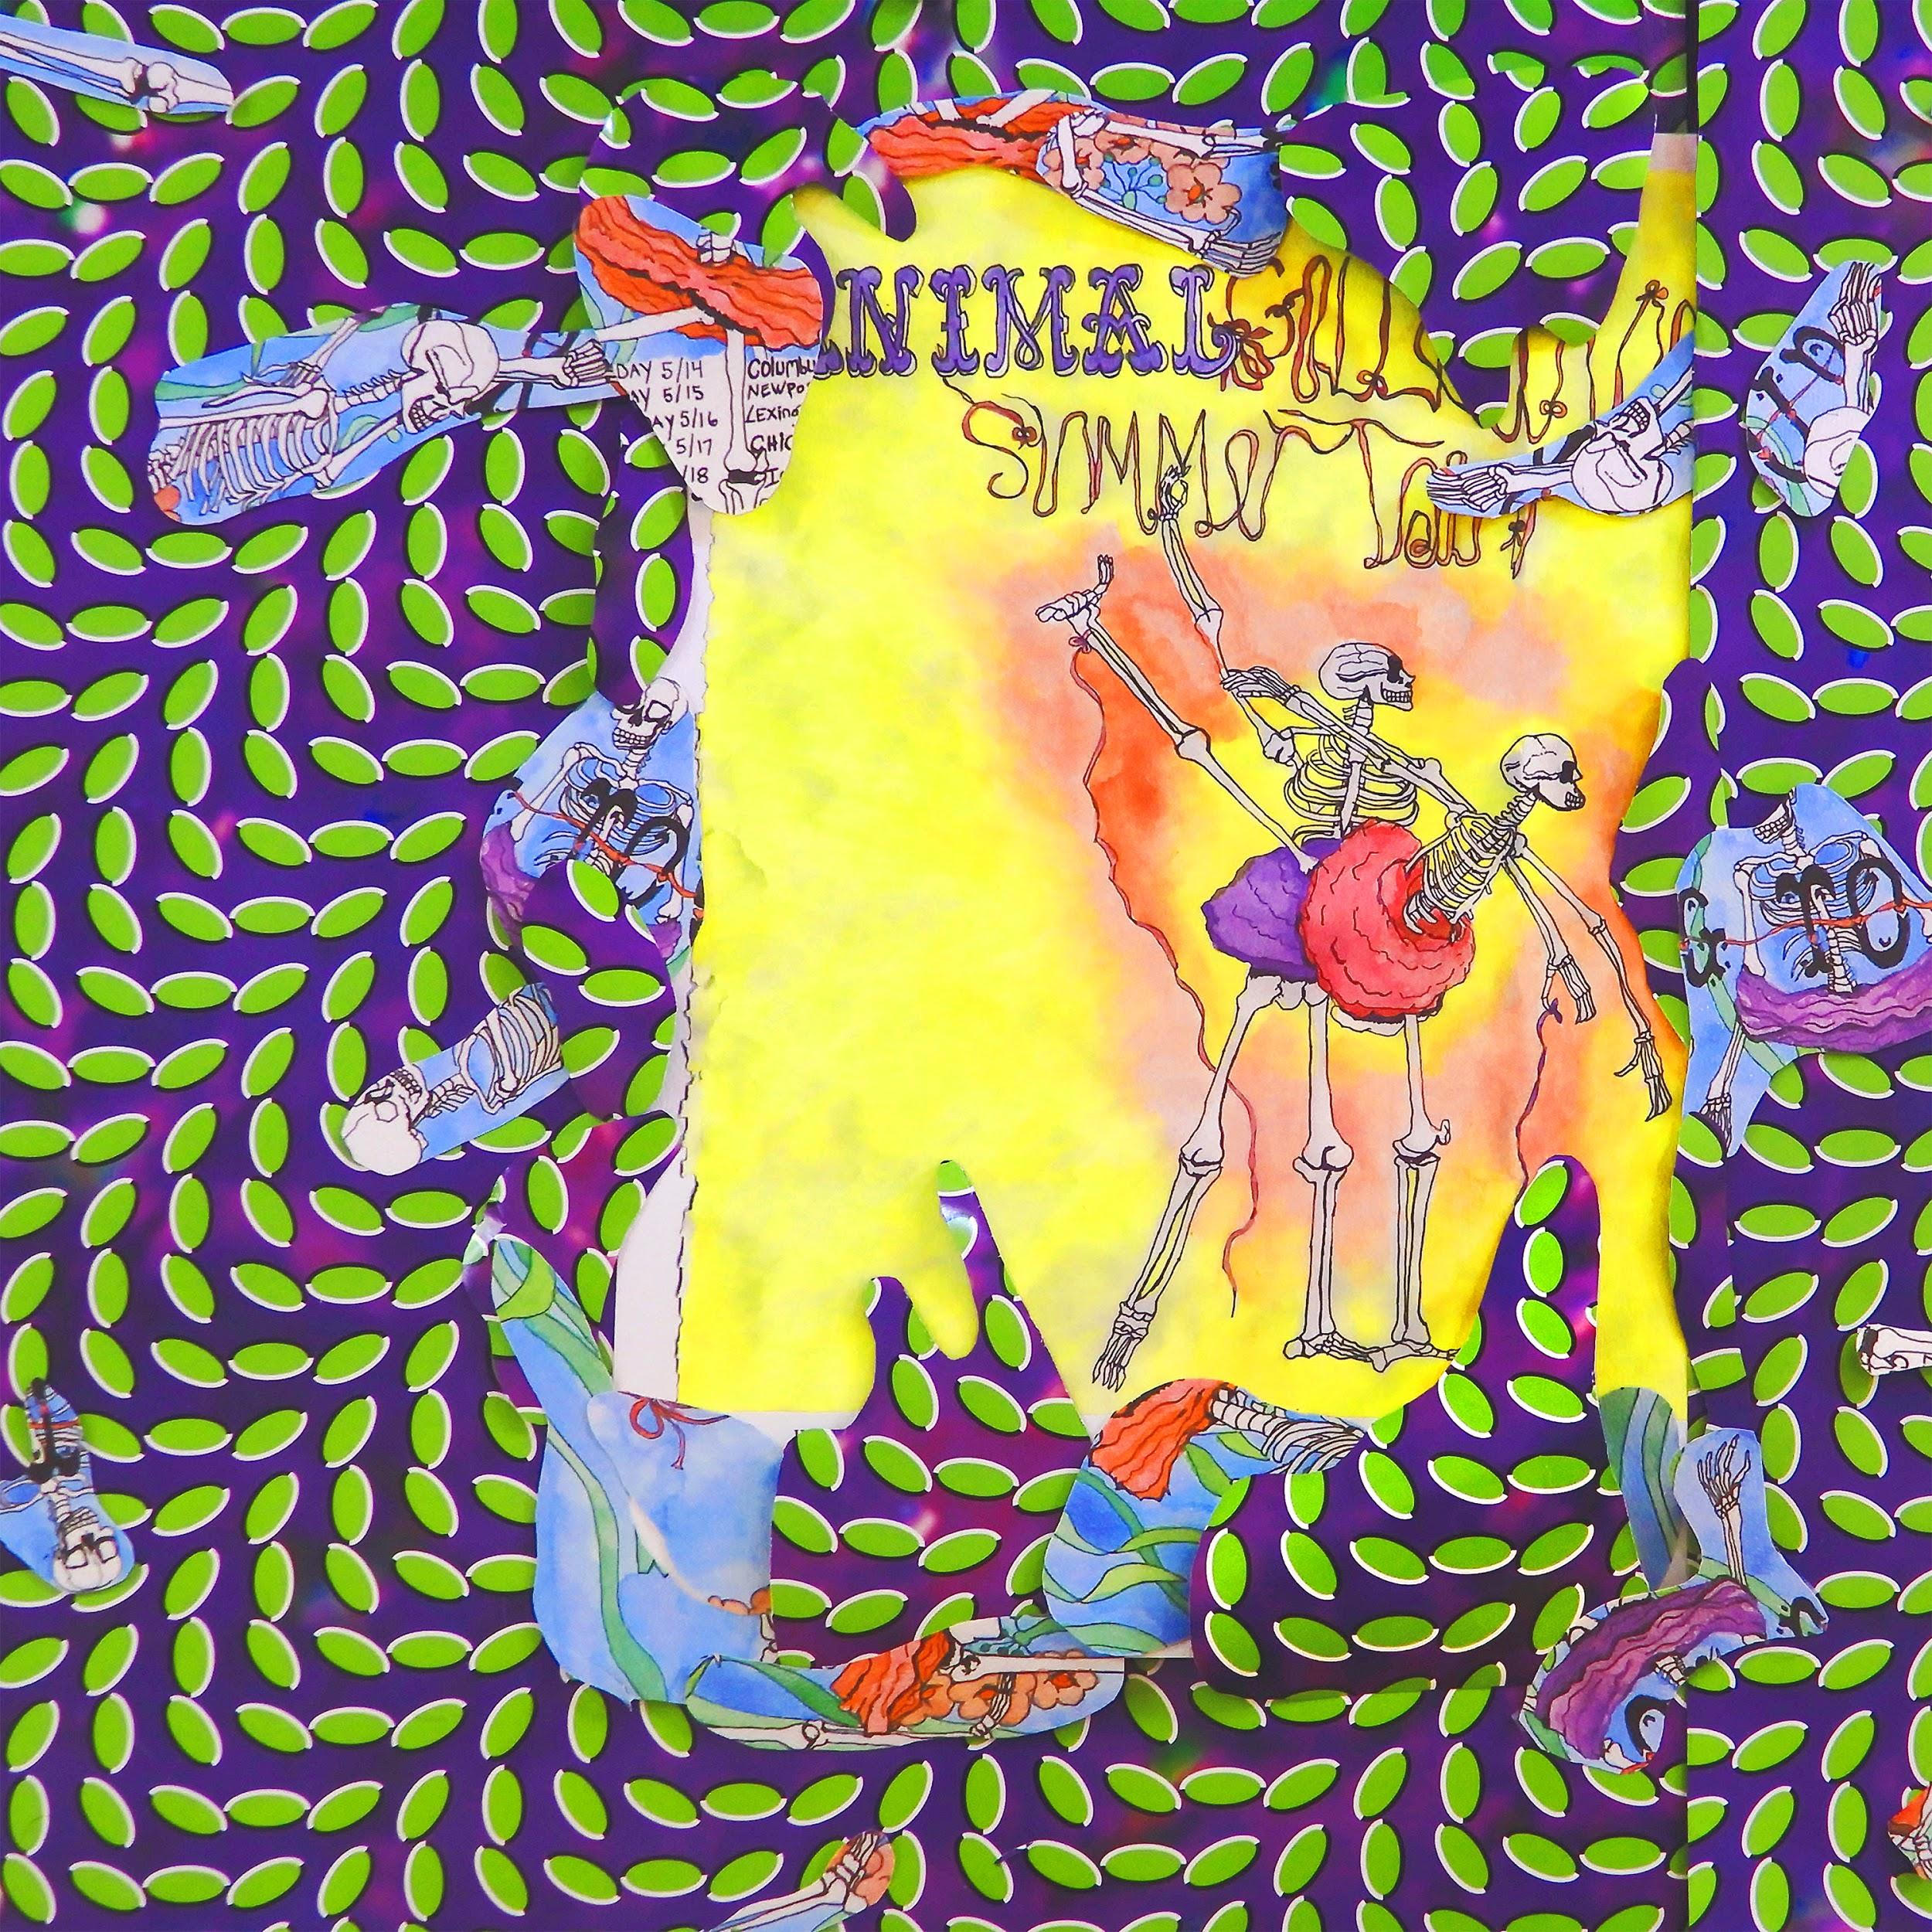 Animal Collective have revealed a new live album entitled Ballet Slippers, released in honor of the 10-year anniversary of Merriweather Post Pavilion